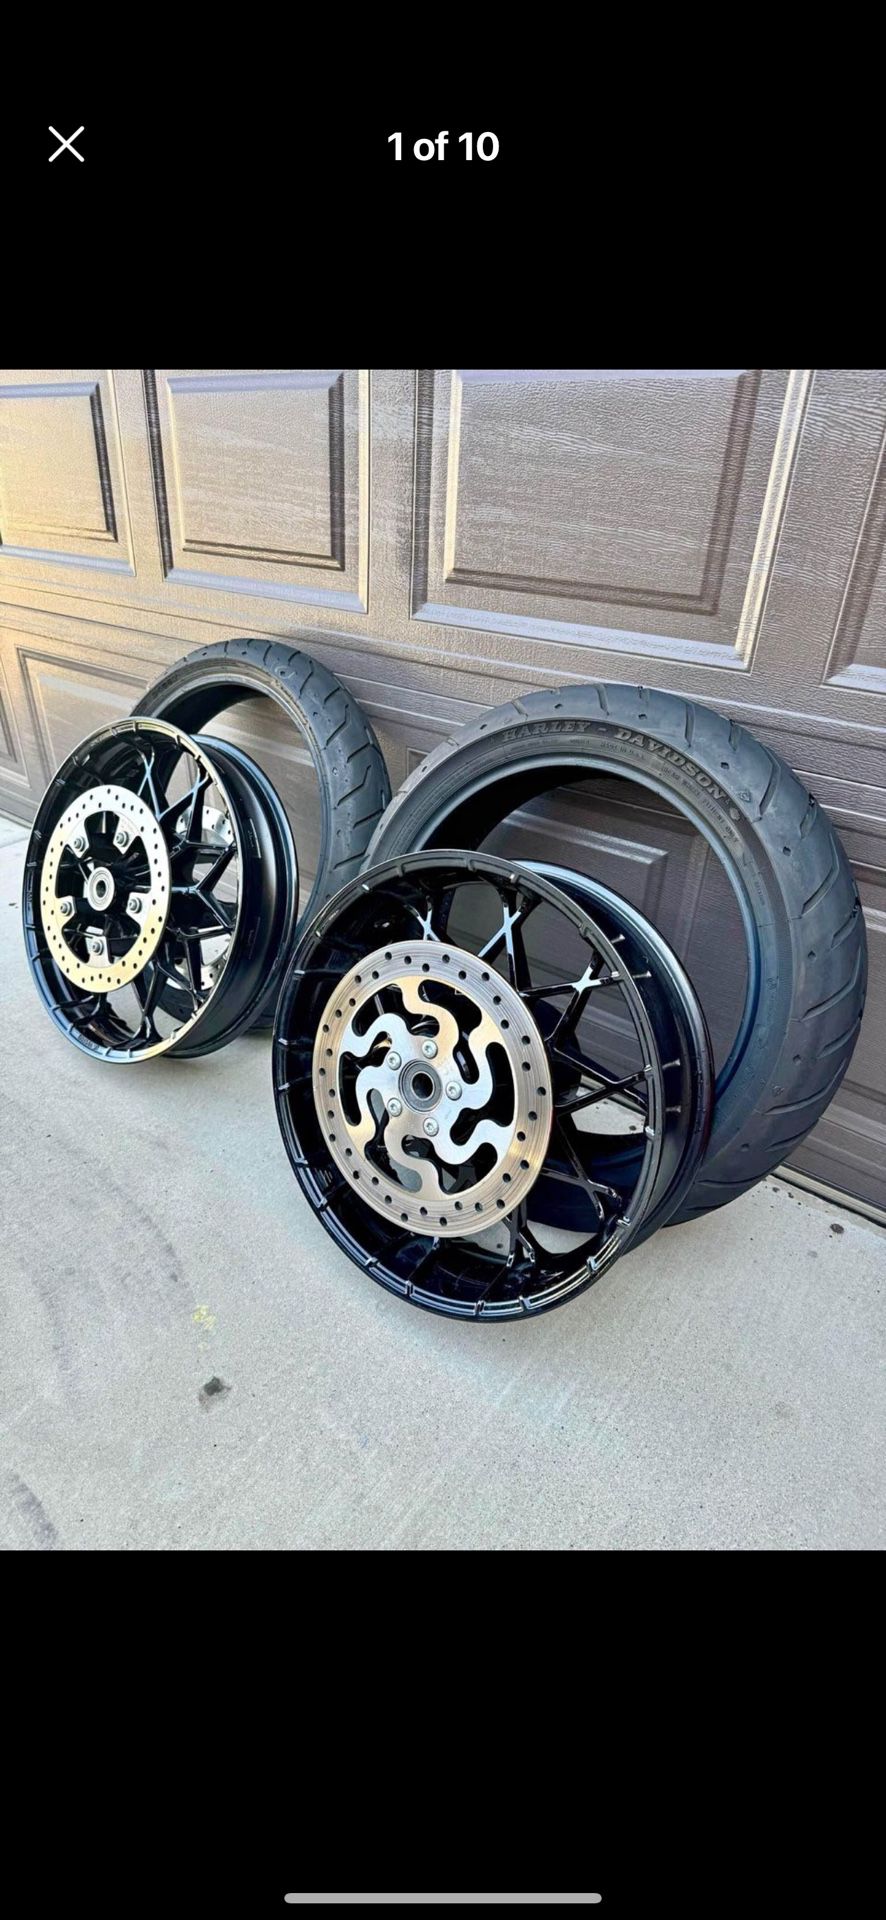 Harley Davidson  Prodigy Wheels No Tires Included 